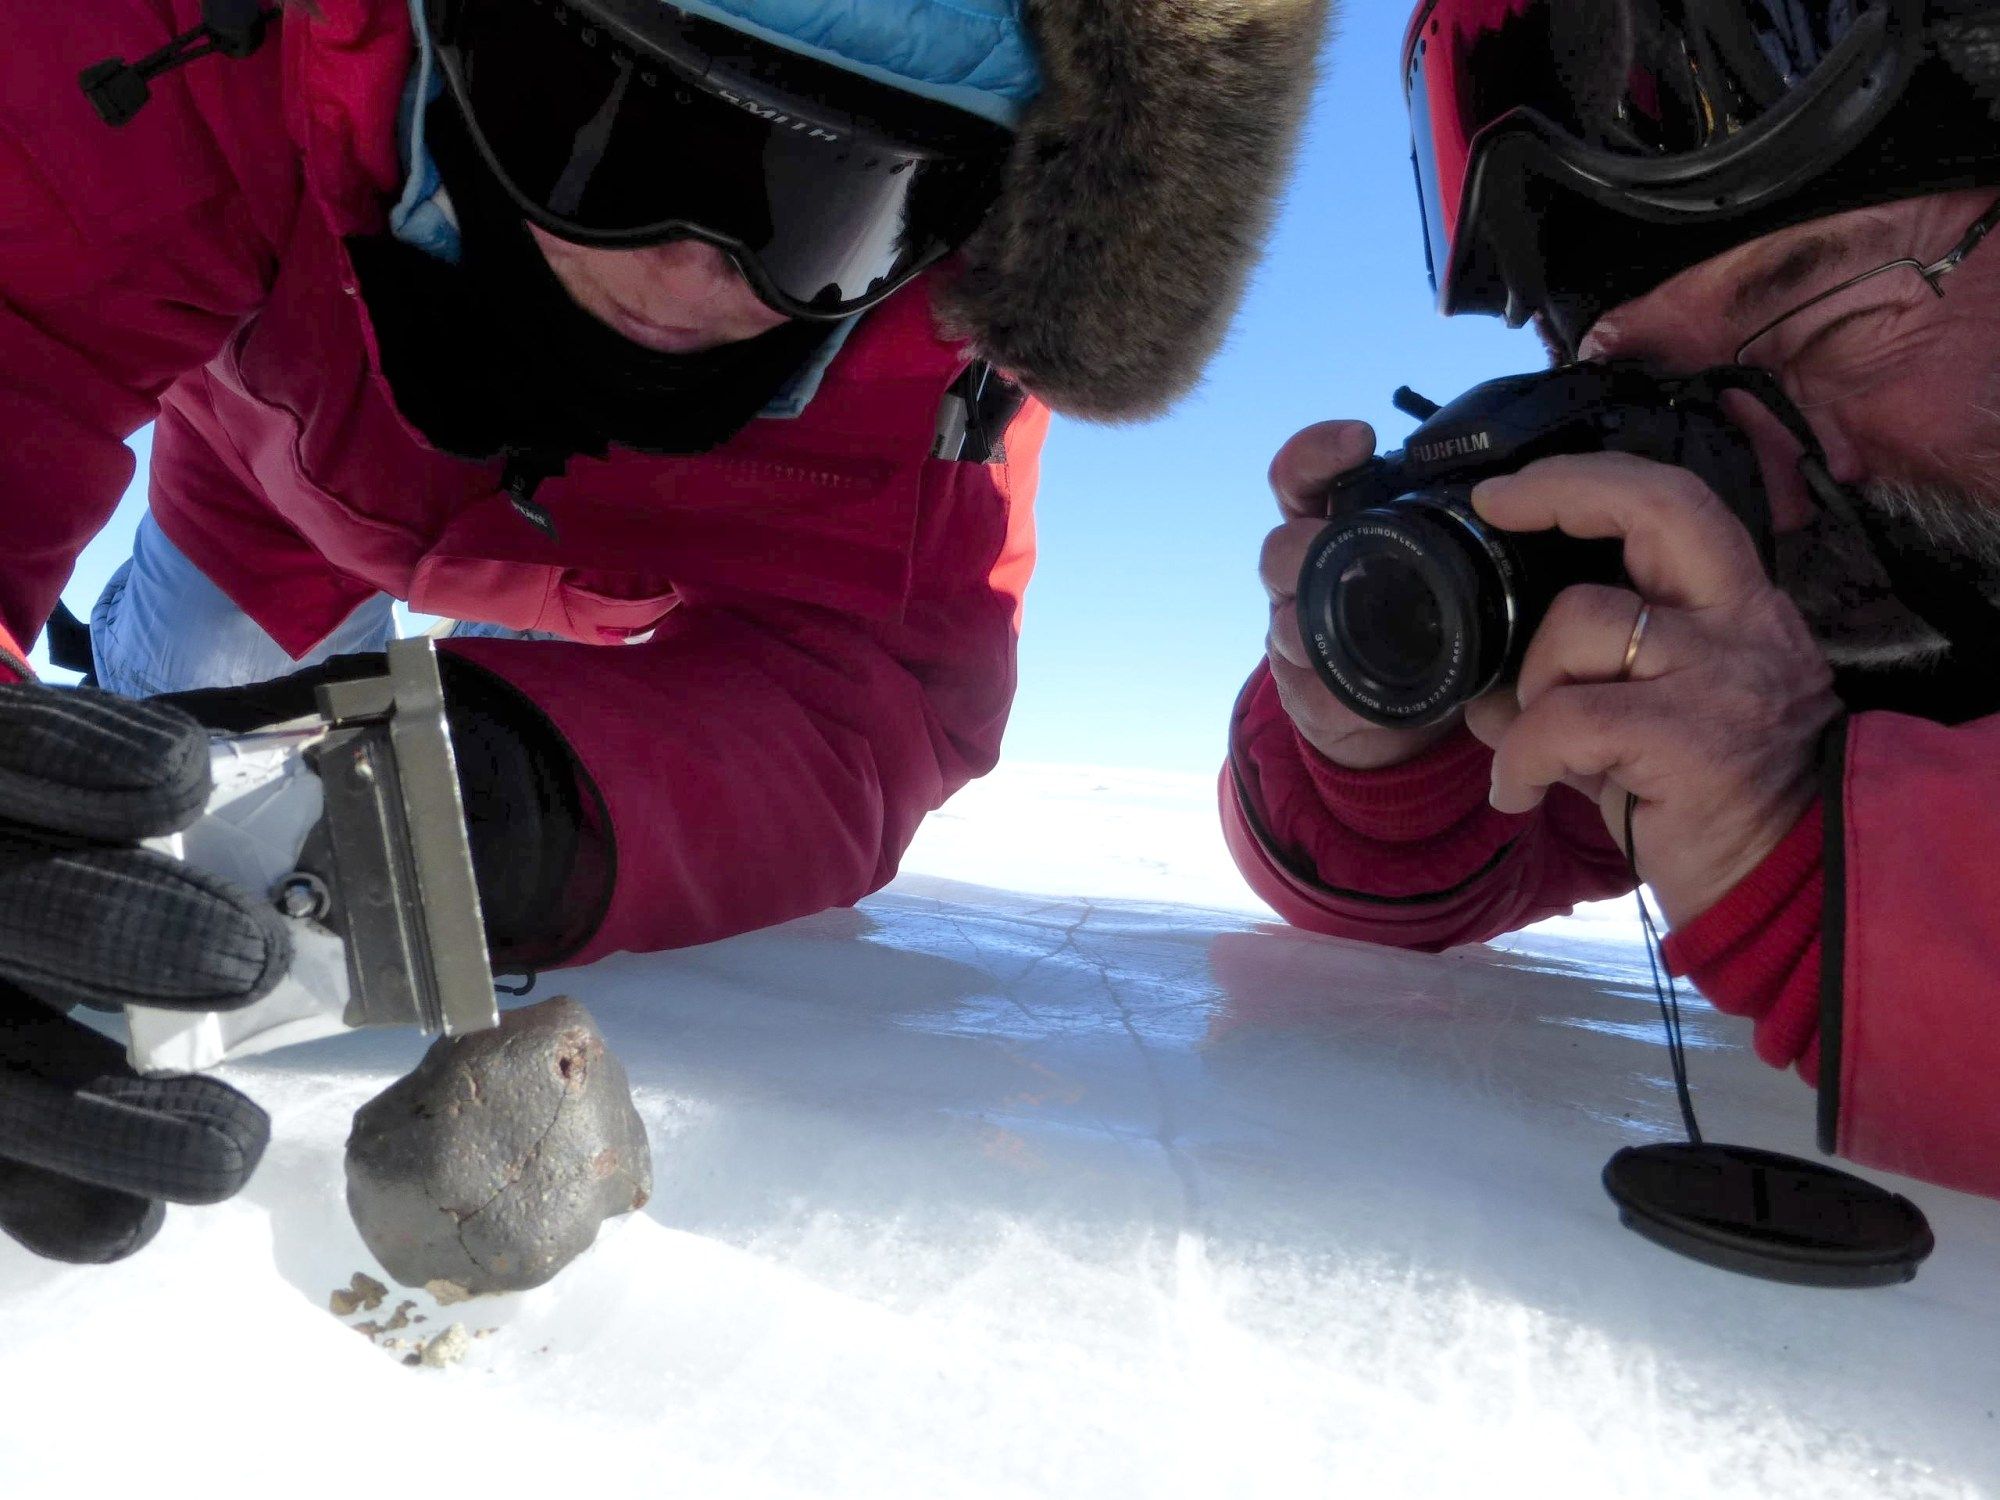 Scientists in heavy red coats and eye goggles photograph a meteorite in the snow.